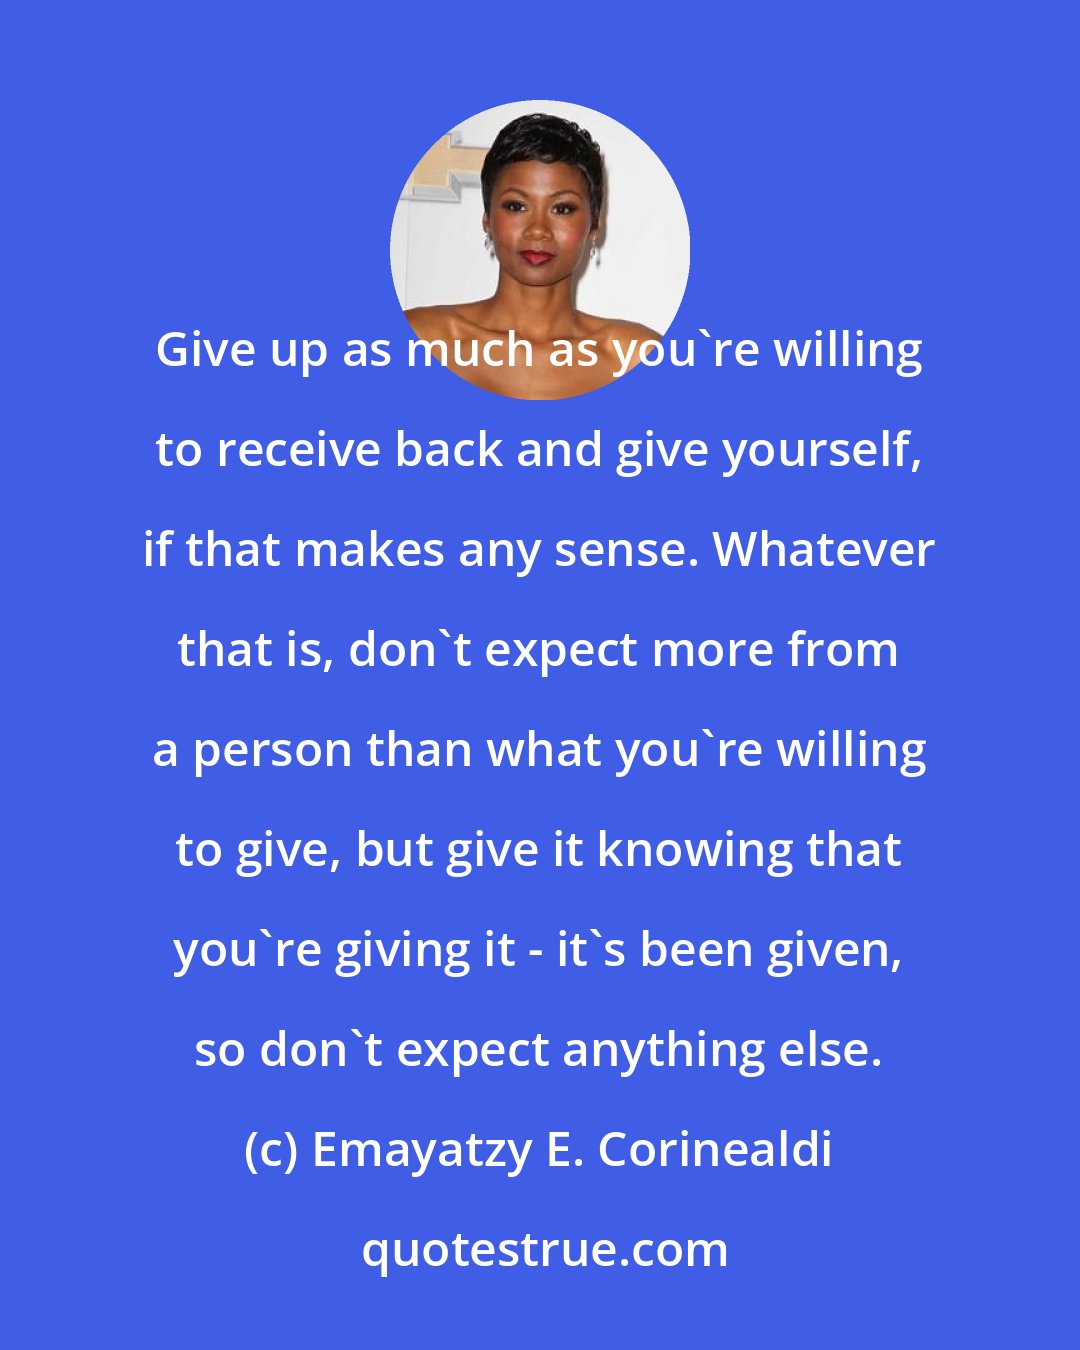 Emayatzy E. Corinealdi: Give up as much as you're willing to receive back and give yourself, if that makes any sense. Whatever that is, don't expect more from a person than what you're willing to give, but give it knowing that you're giving it - it's been given, so don't expect anything else.